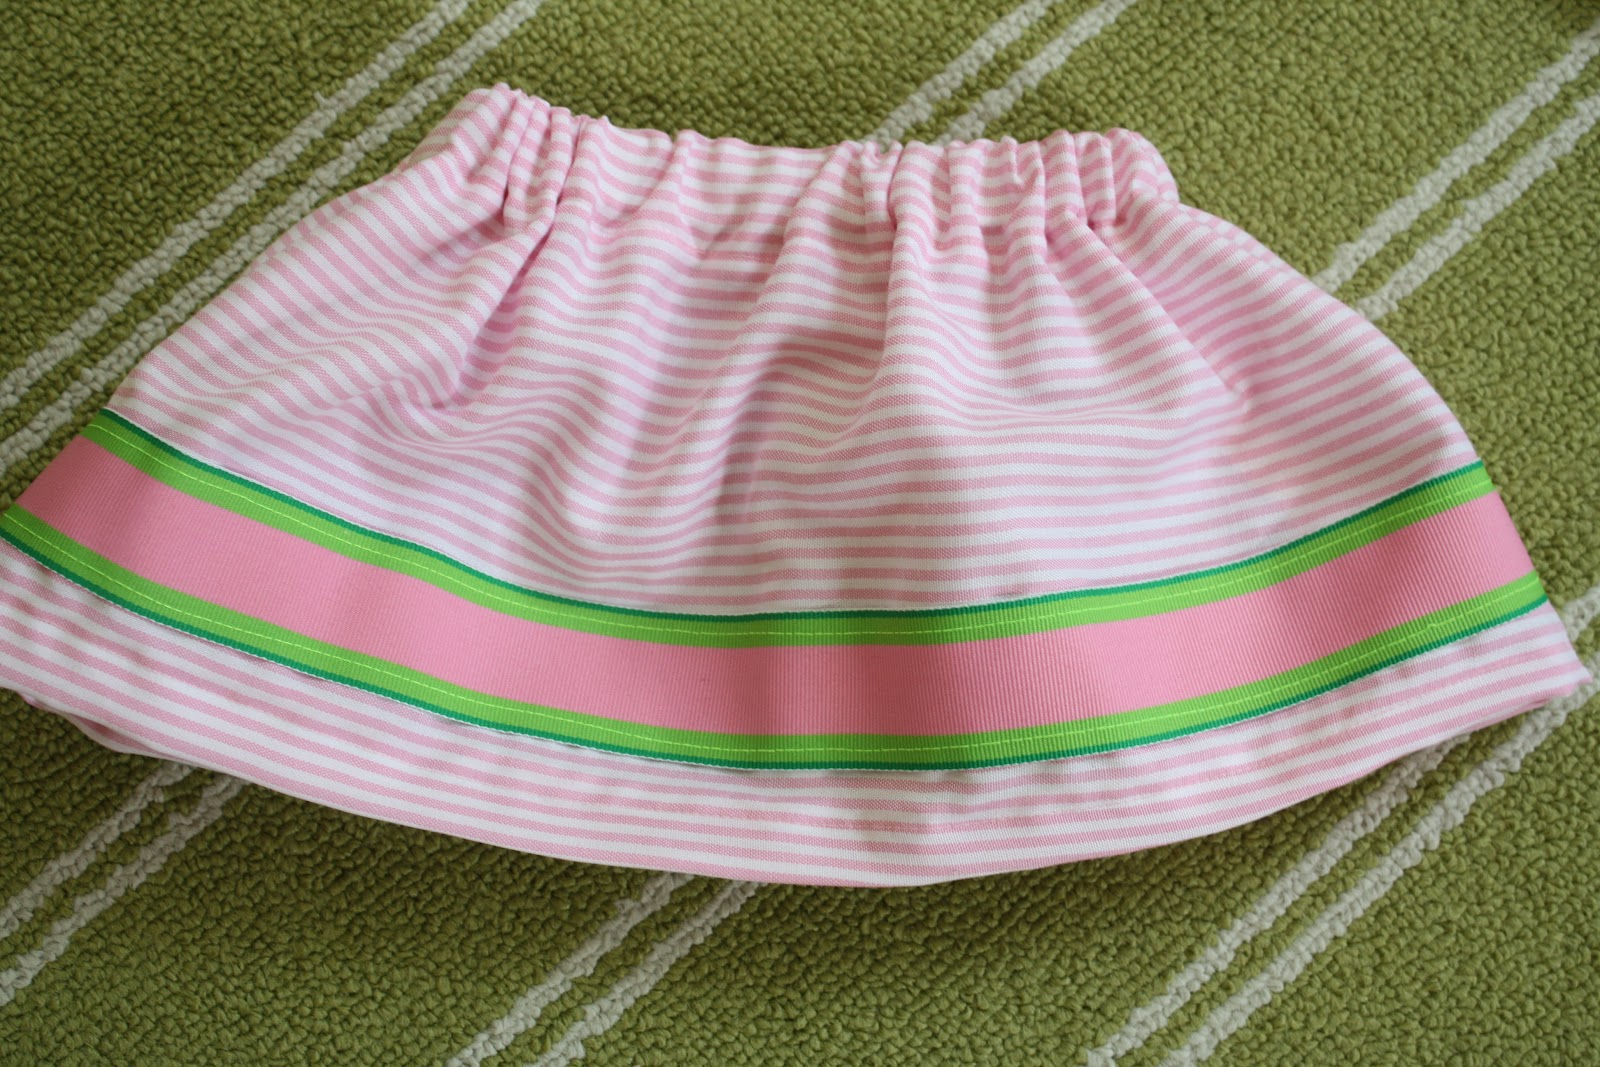 How to Make A Skirt (Very Easily) - The Chirping Moms